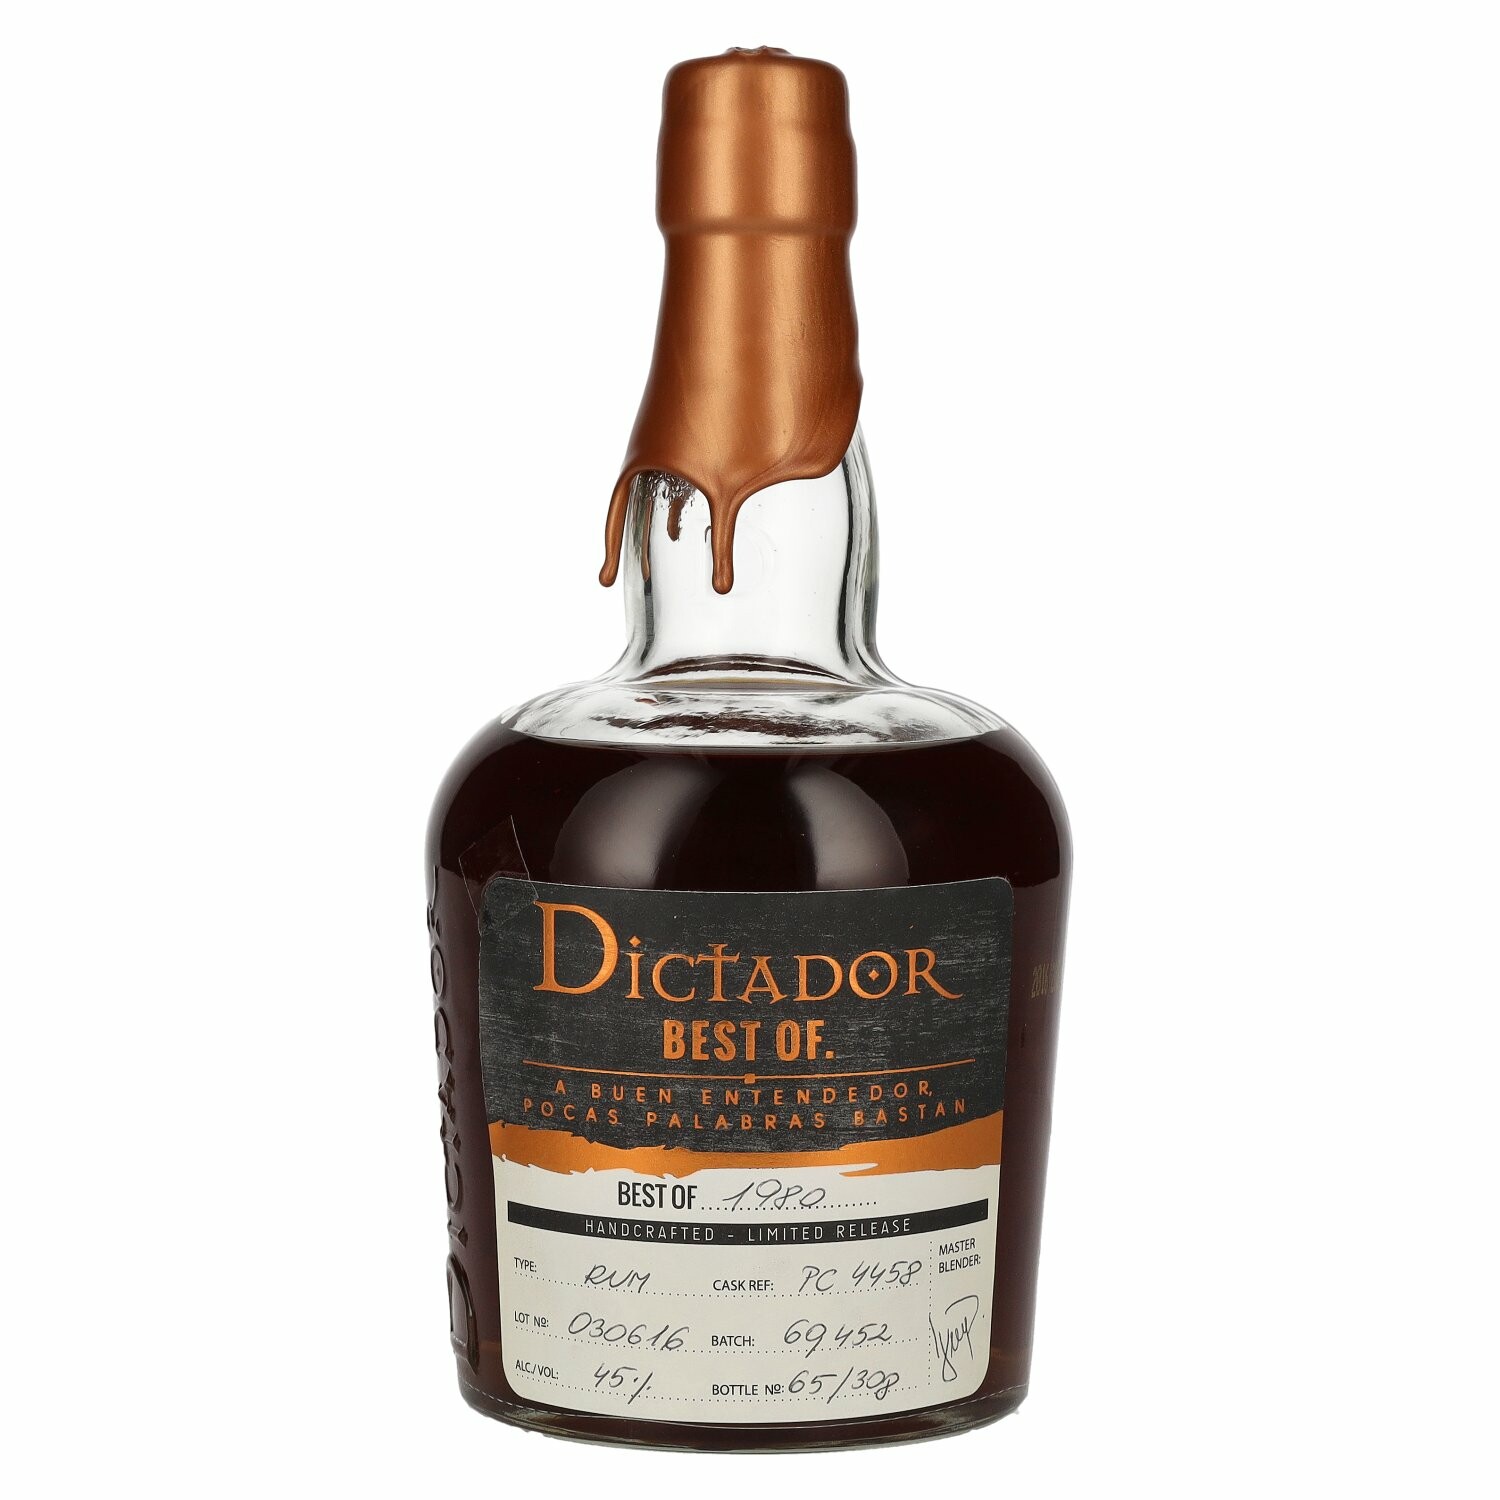 Dictador BEST OF 1980 Colombian Rum 030616/PC4458 Limited Release 45% Vol. 0,7l